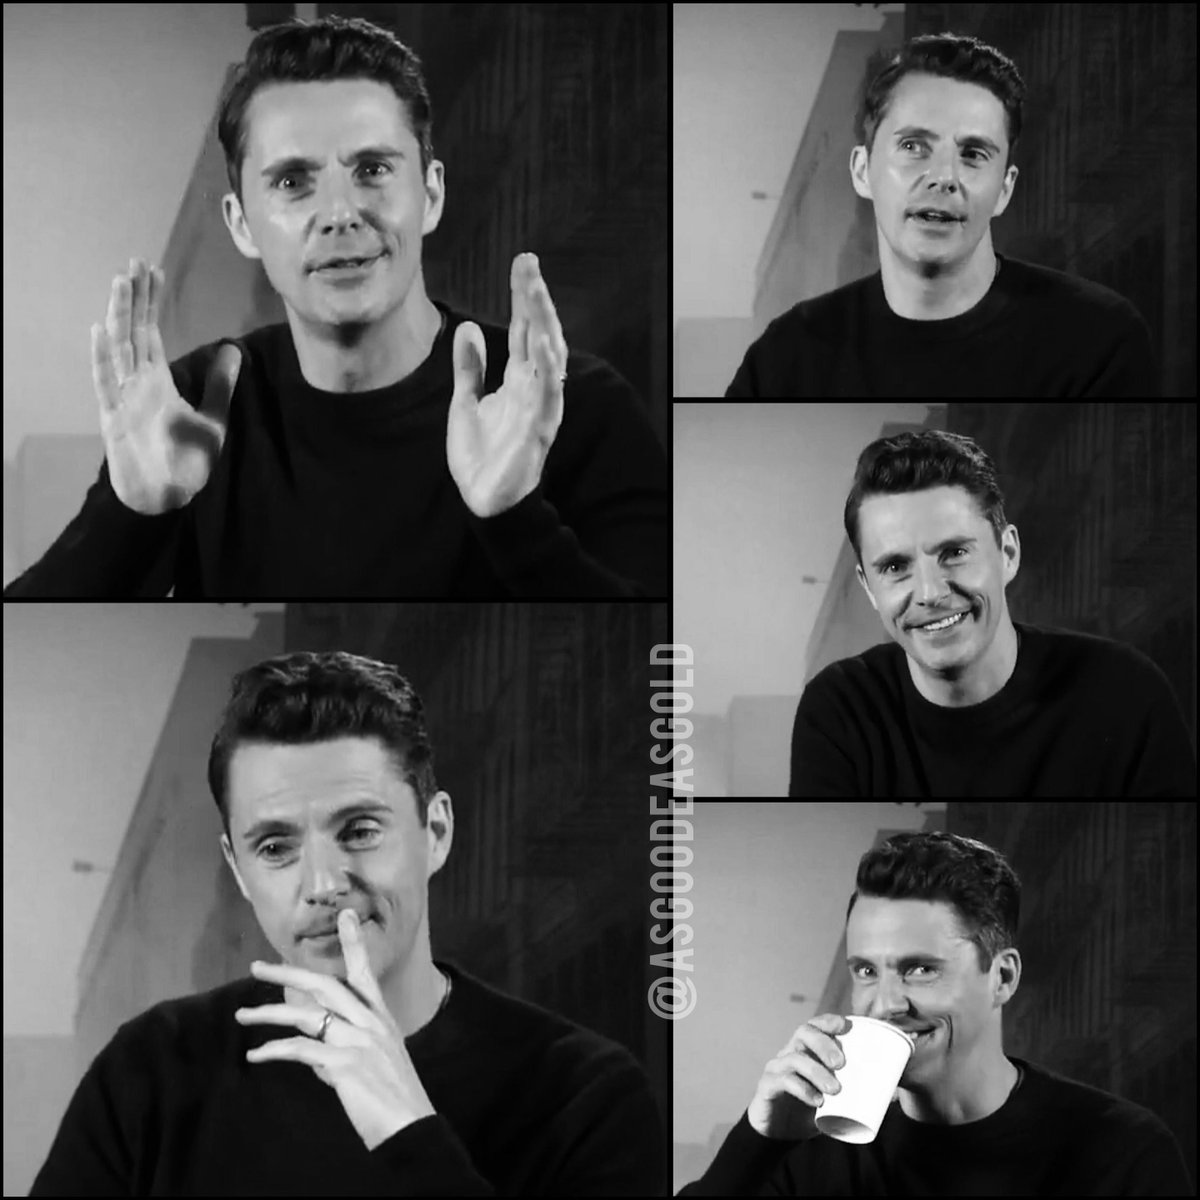 Some of the adorable facial expressions in this hilarious Offer interview (see other post for reel/GIFs of best moments & links). Never change Matthew 💝
#matthewgoode #theoffer
📷 My edit from Esquire Middle East The Offer interview by William Mullally